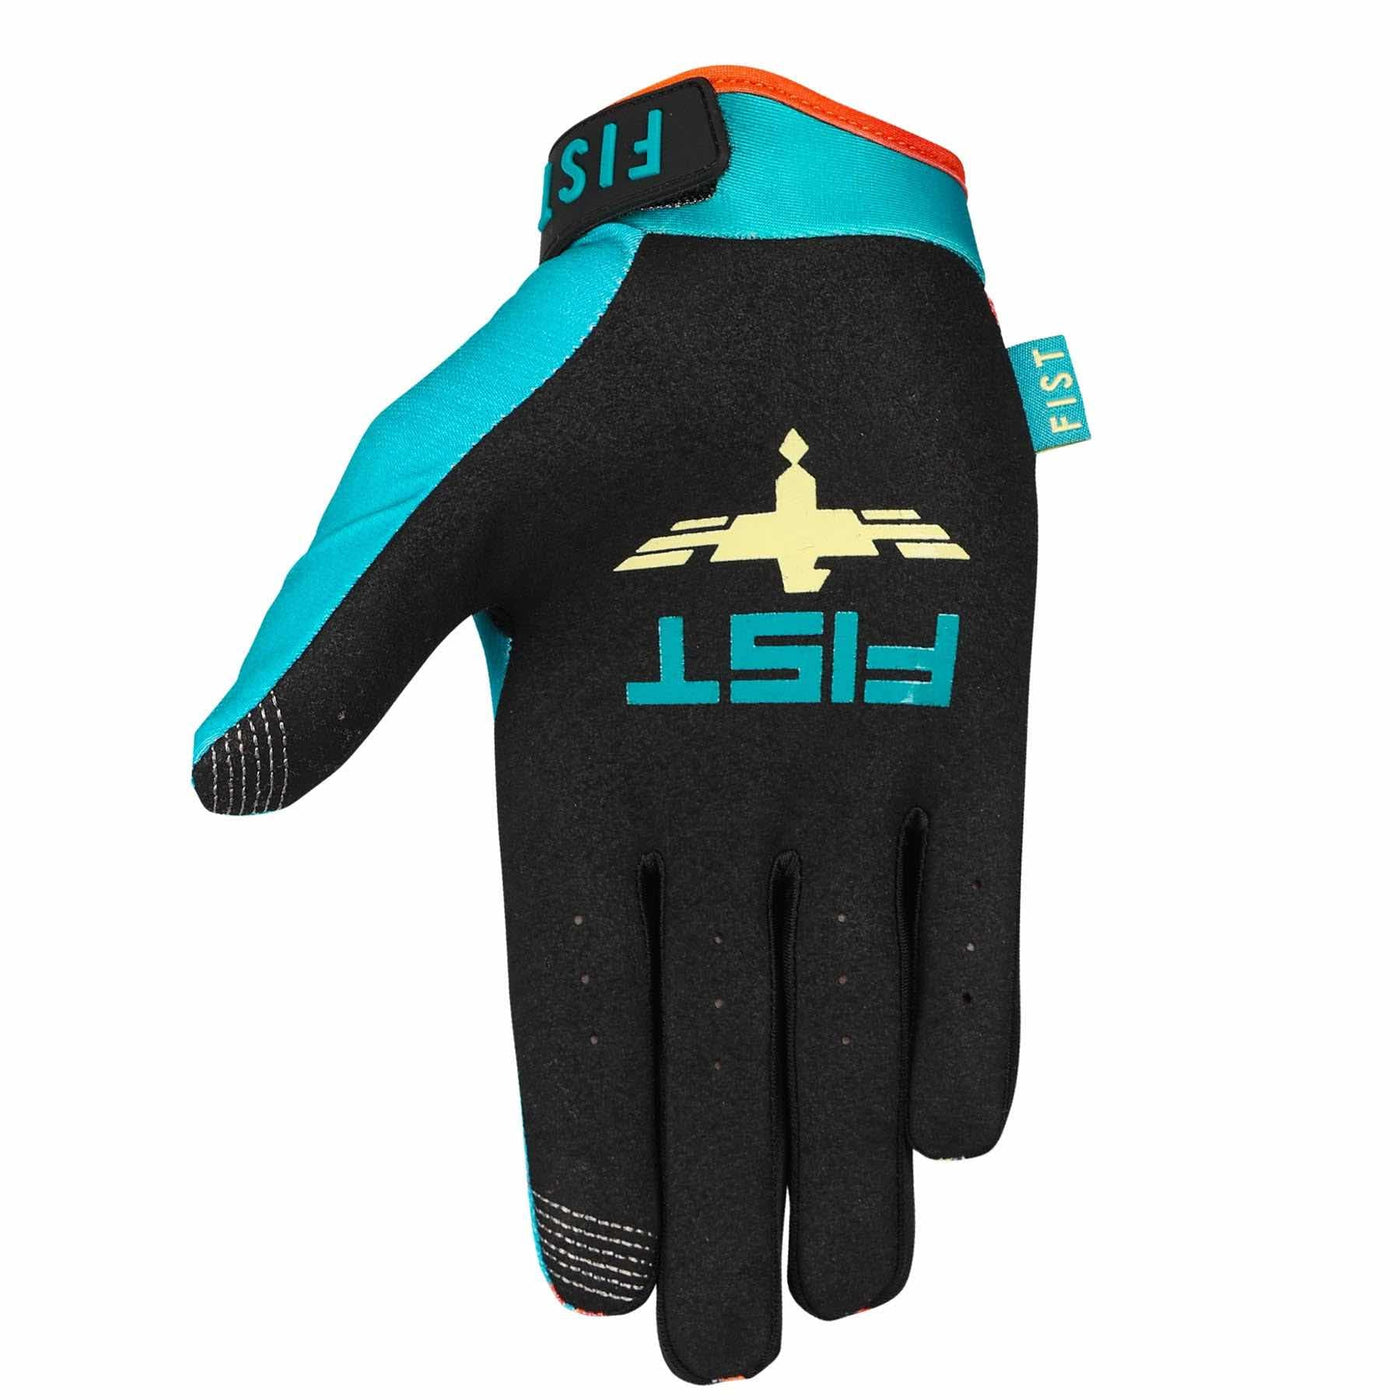 FIST BMX and MX Racing Gloves - Thunderbird 8Lines Shop - Fast Shipping